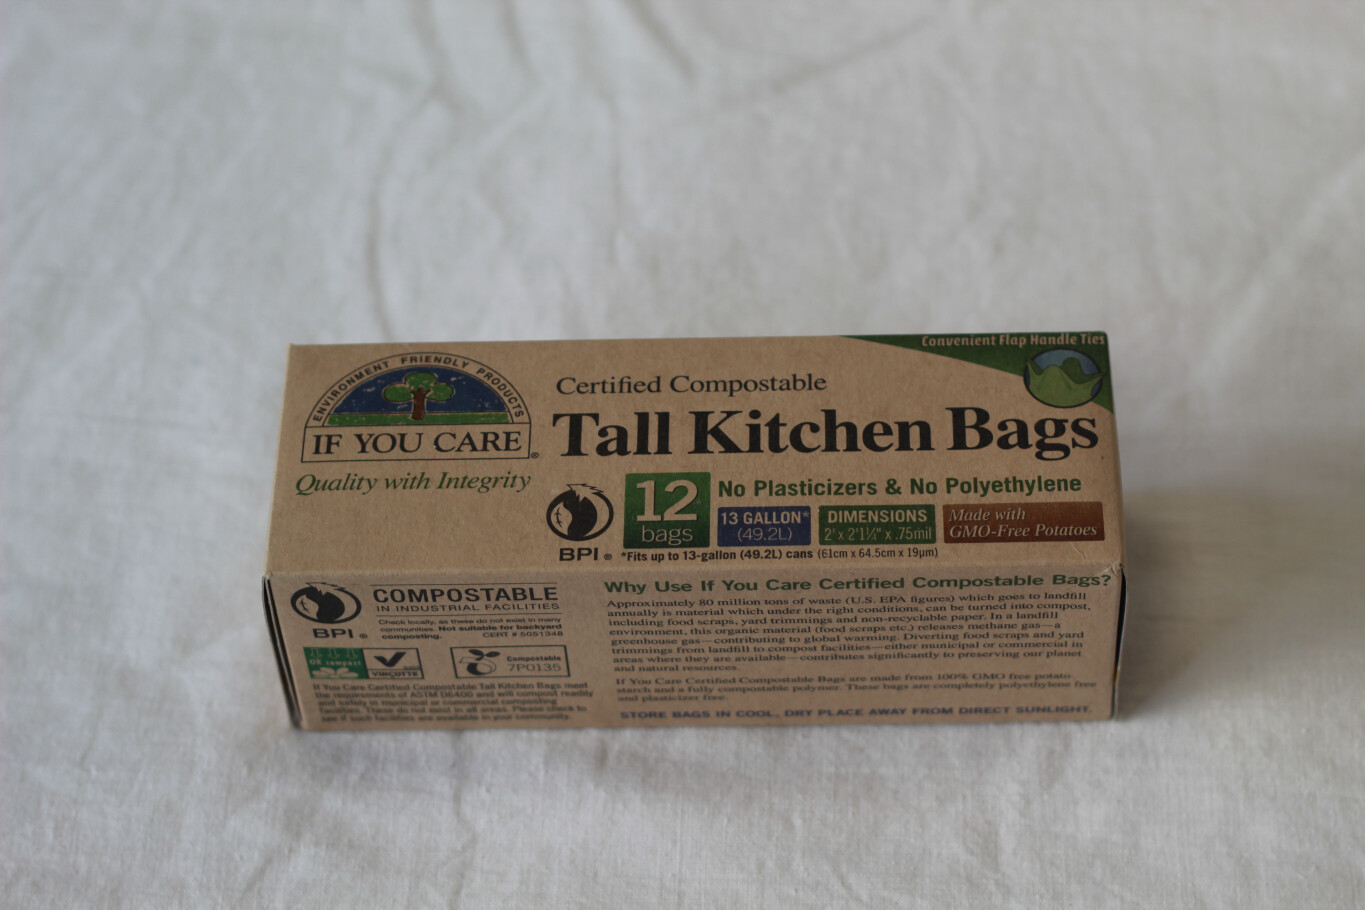 If You Care Tall Kitchen Bags